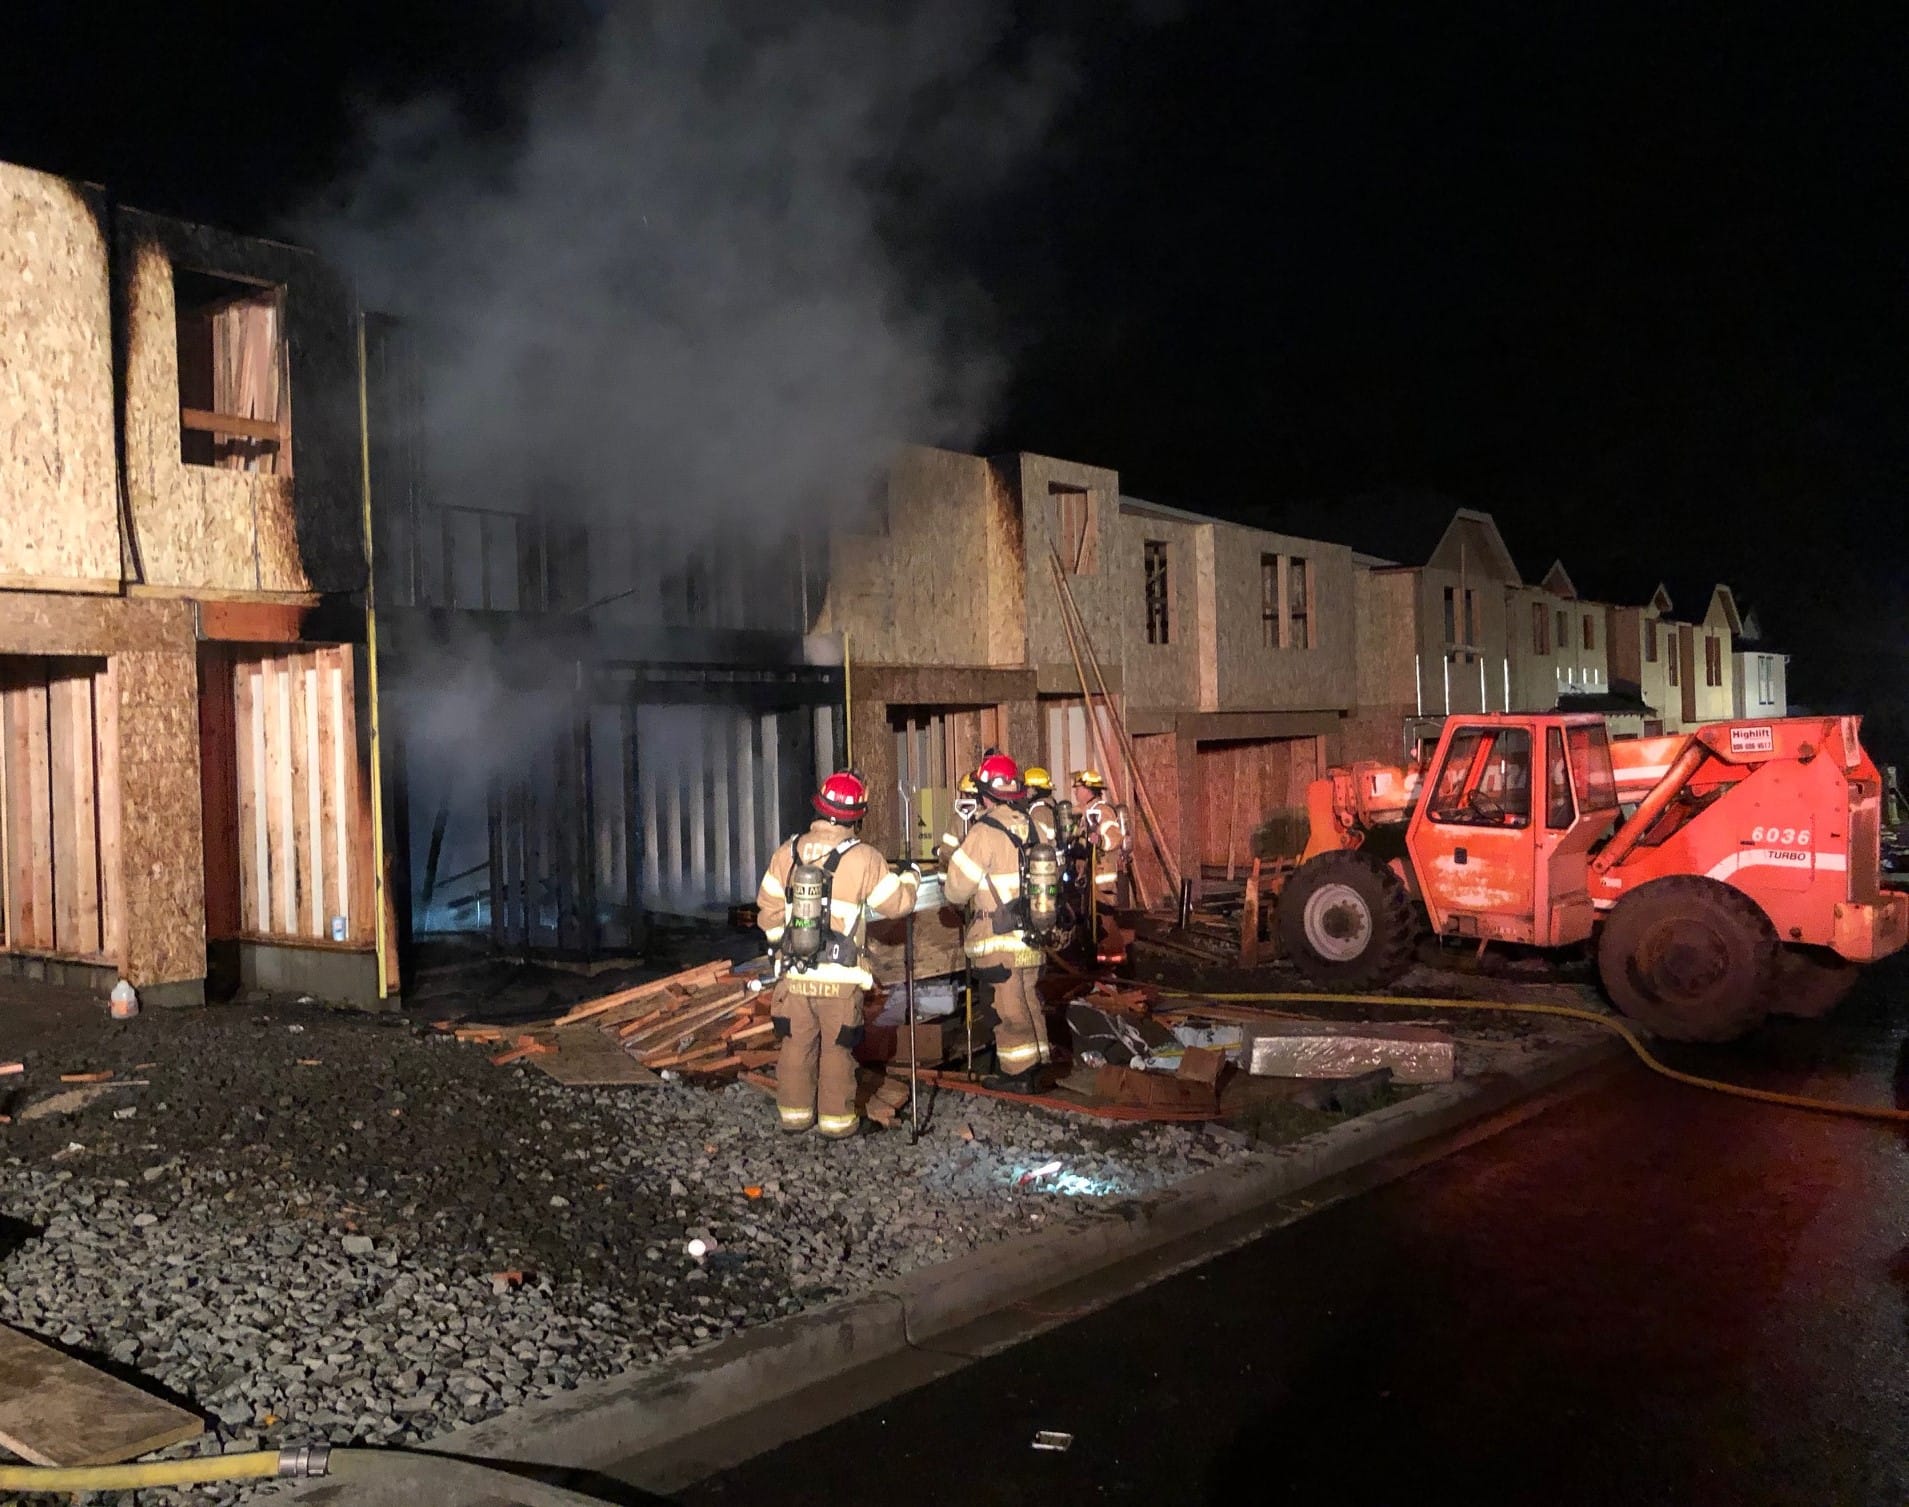 Clark County Fire & Rescue crews were dispatched about 12:10 a.m. Wednesday to 237 N. 33rd Court in Ridgefield for a report of a residential structure fire. Authorities believe it was arson.